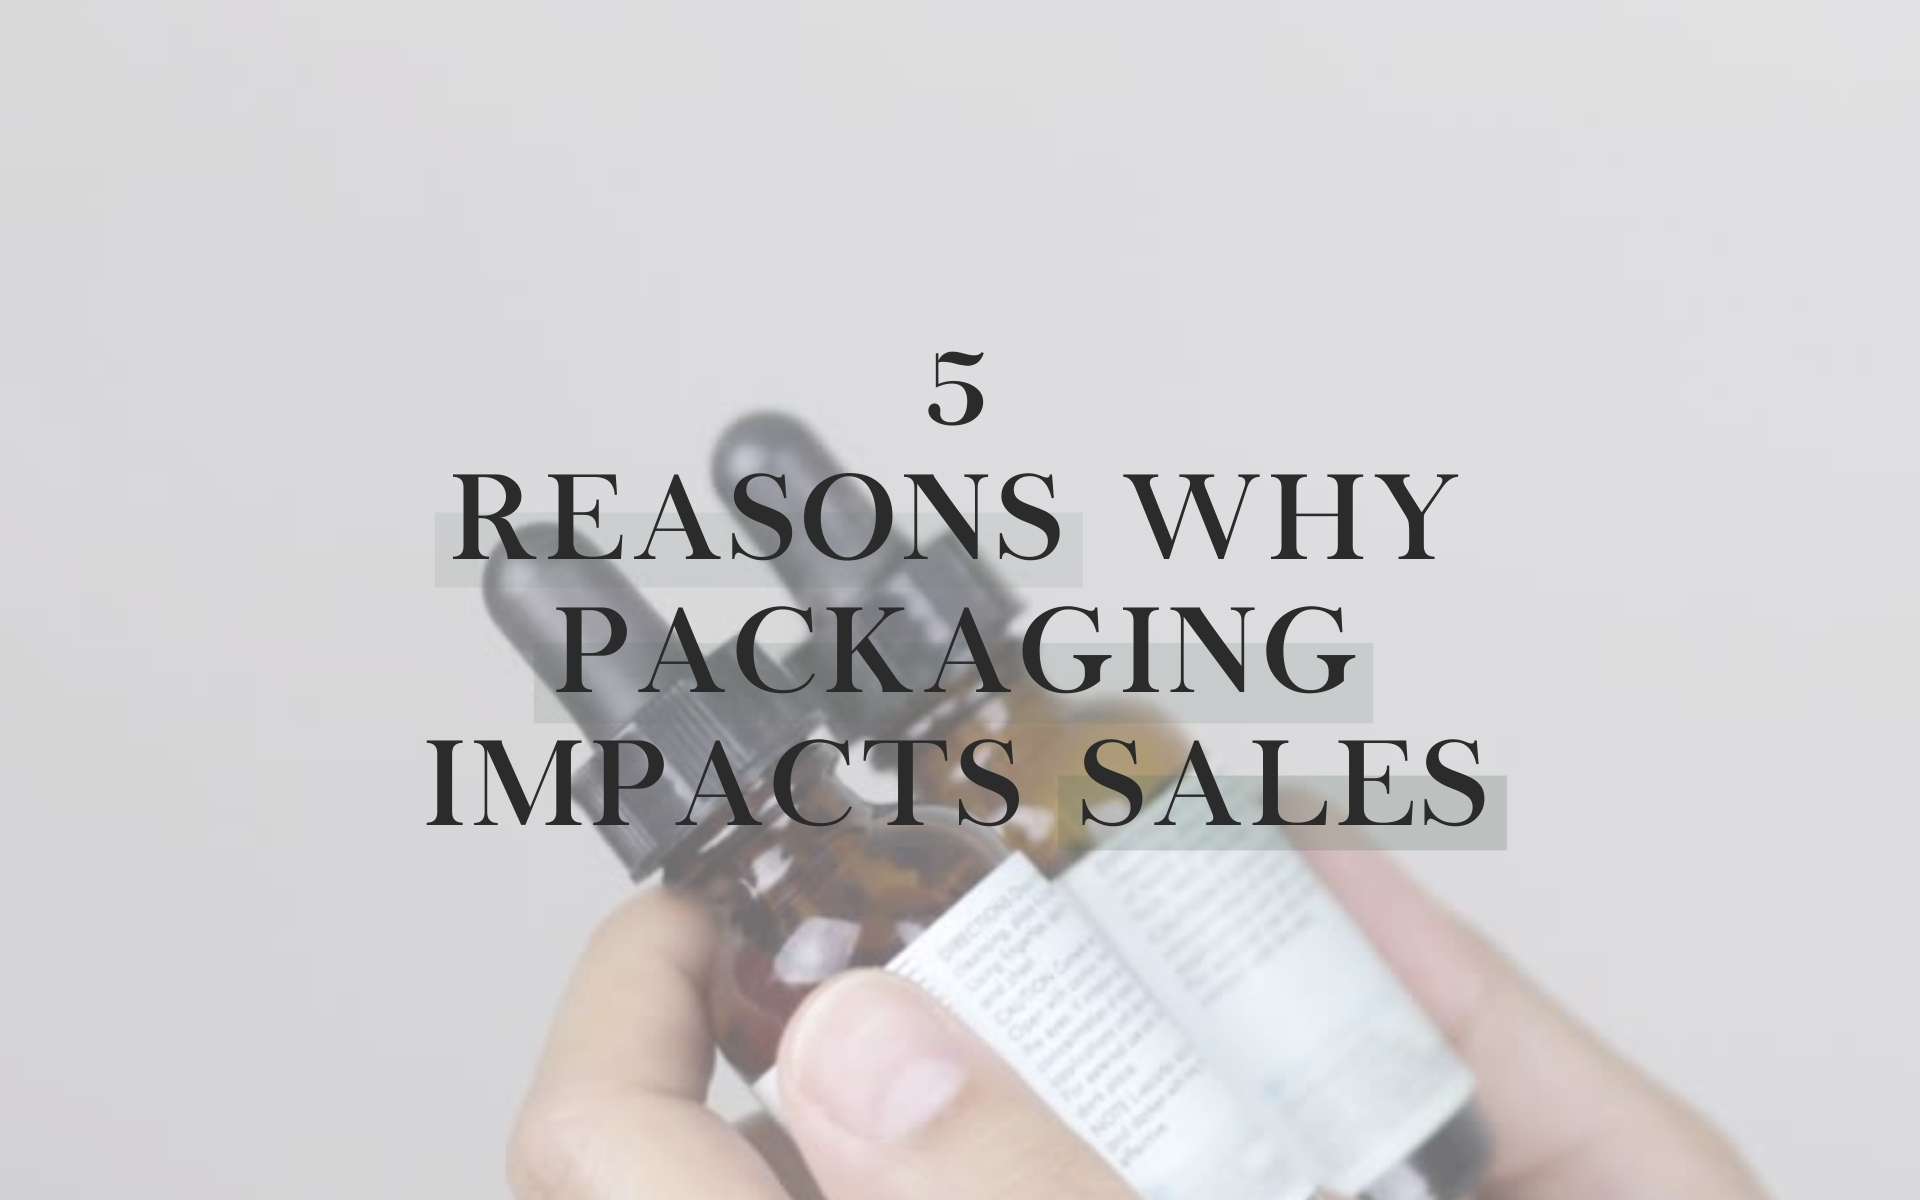 Five reasons why packaging impacts sales